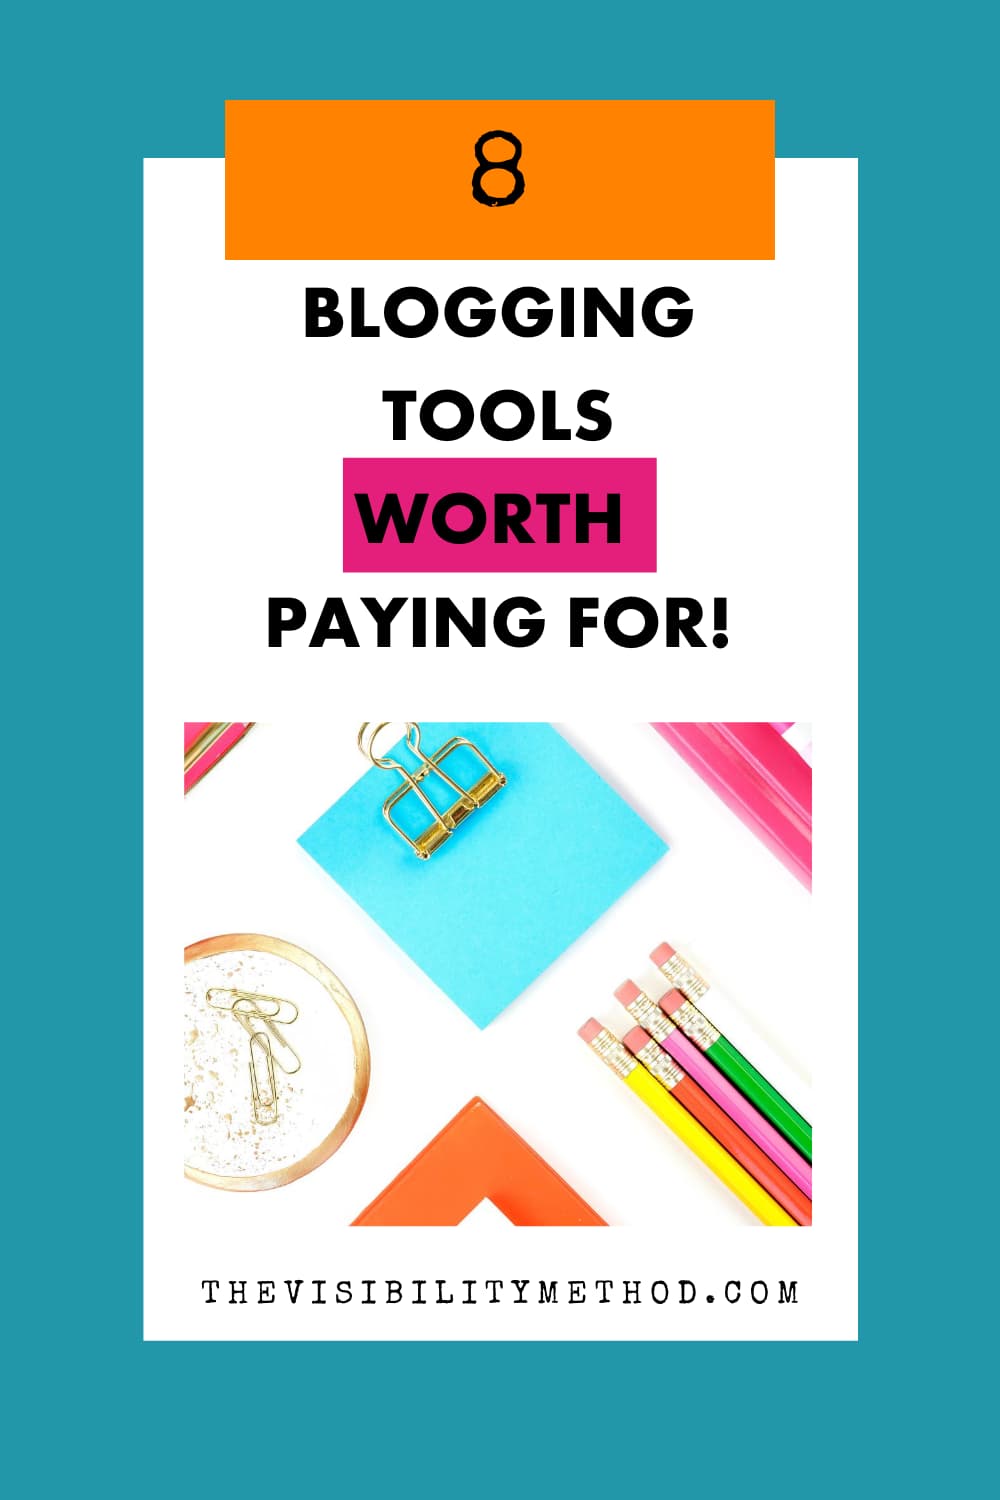 8 blogging tools worth paying for!